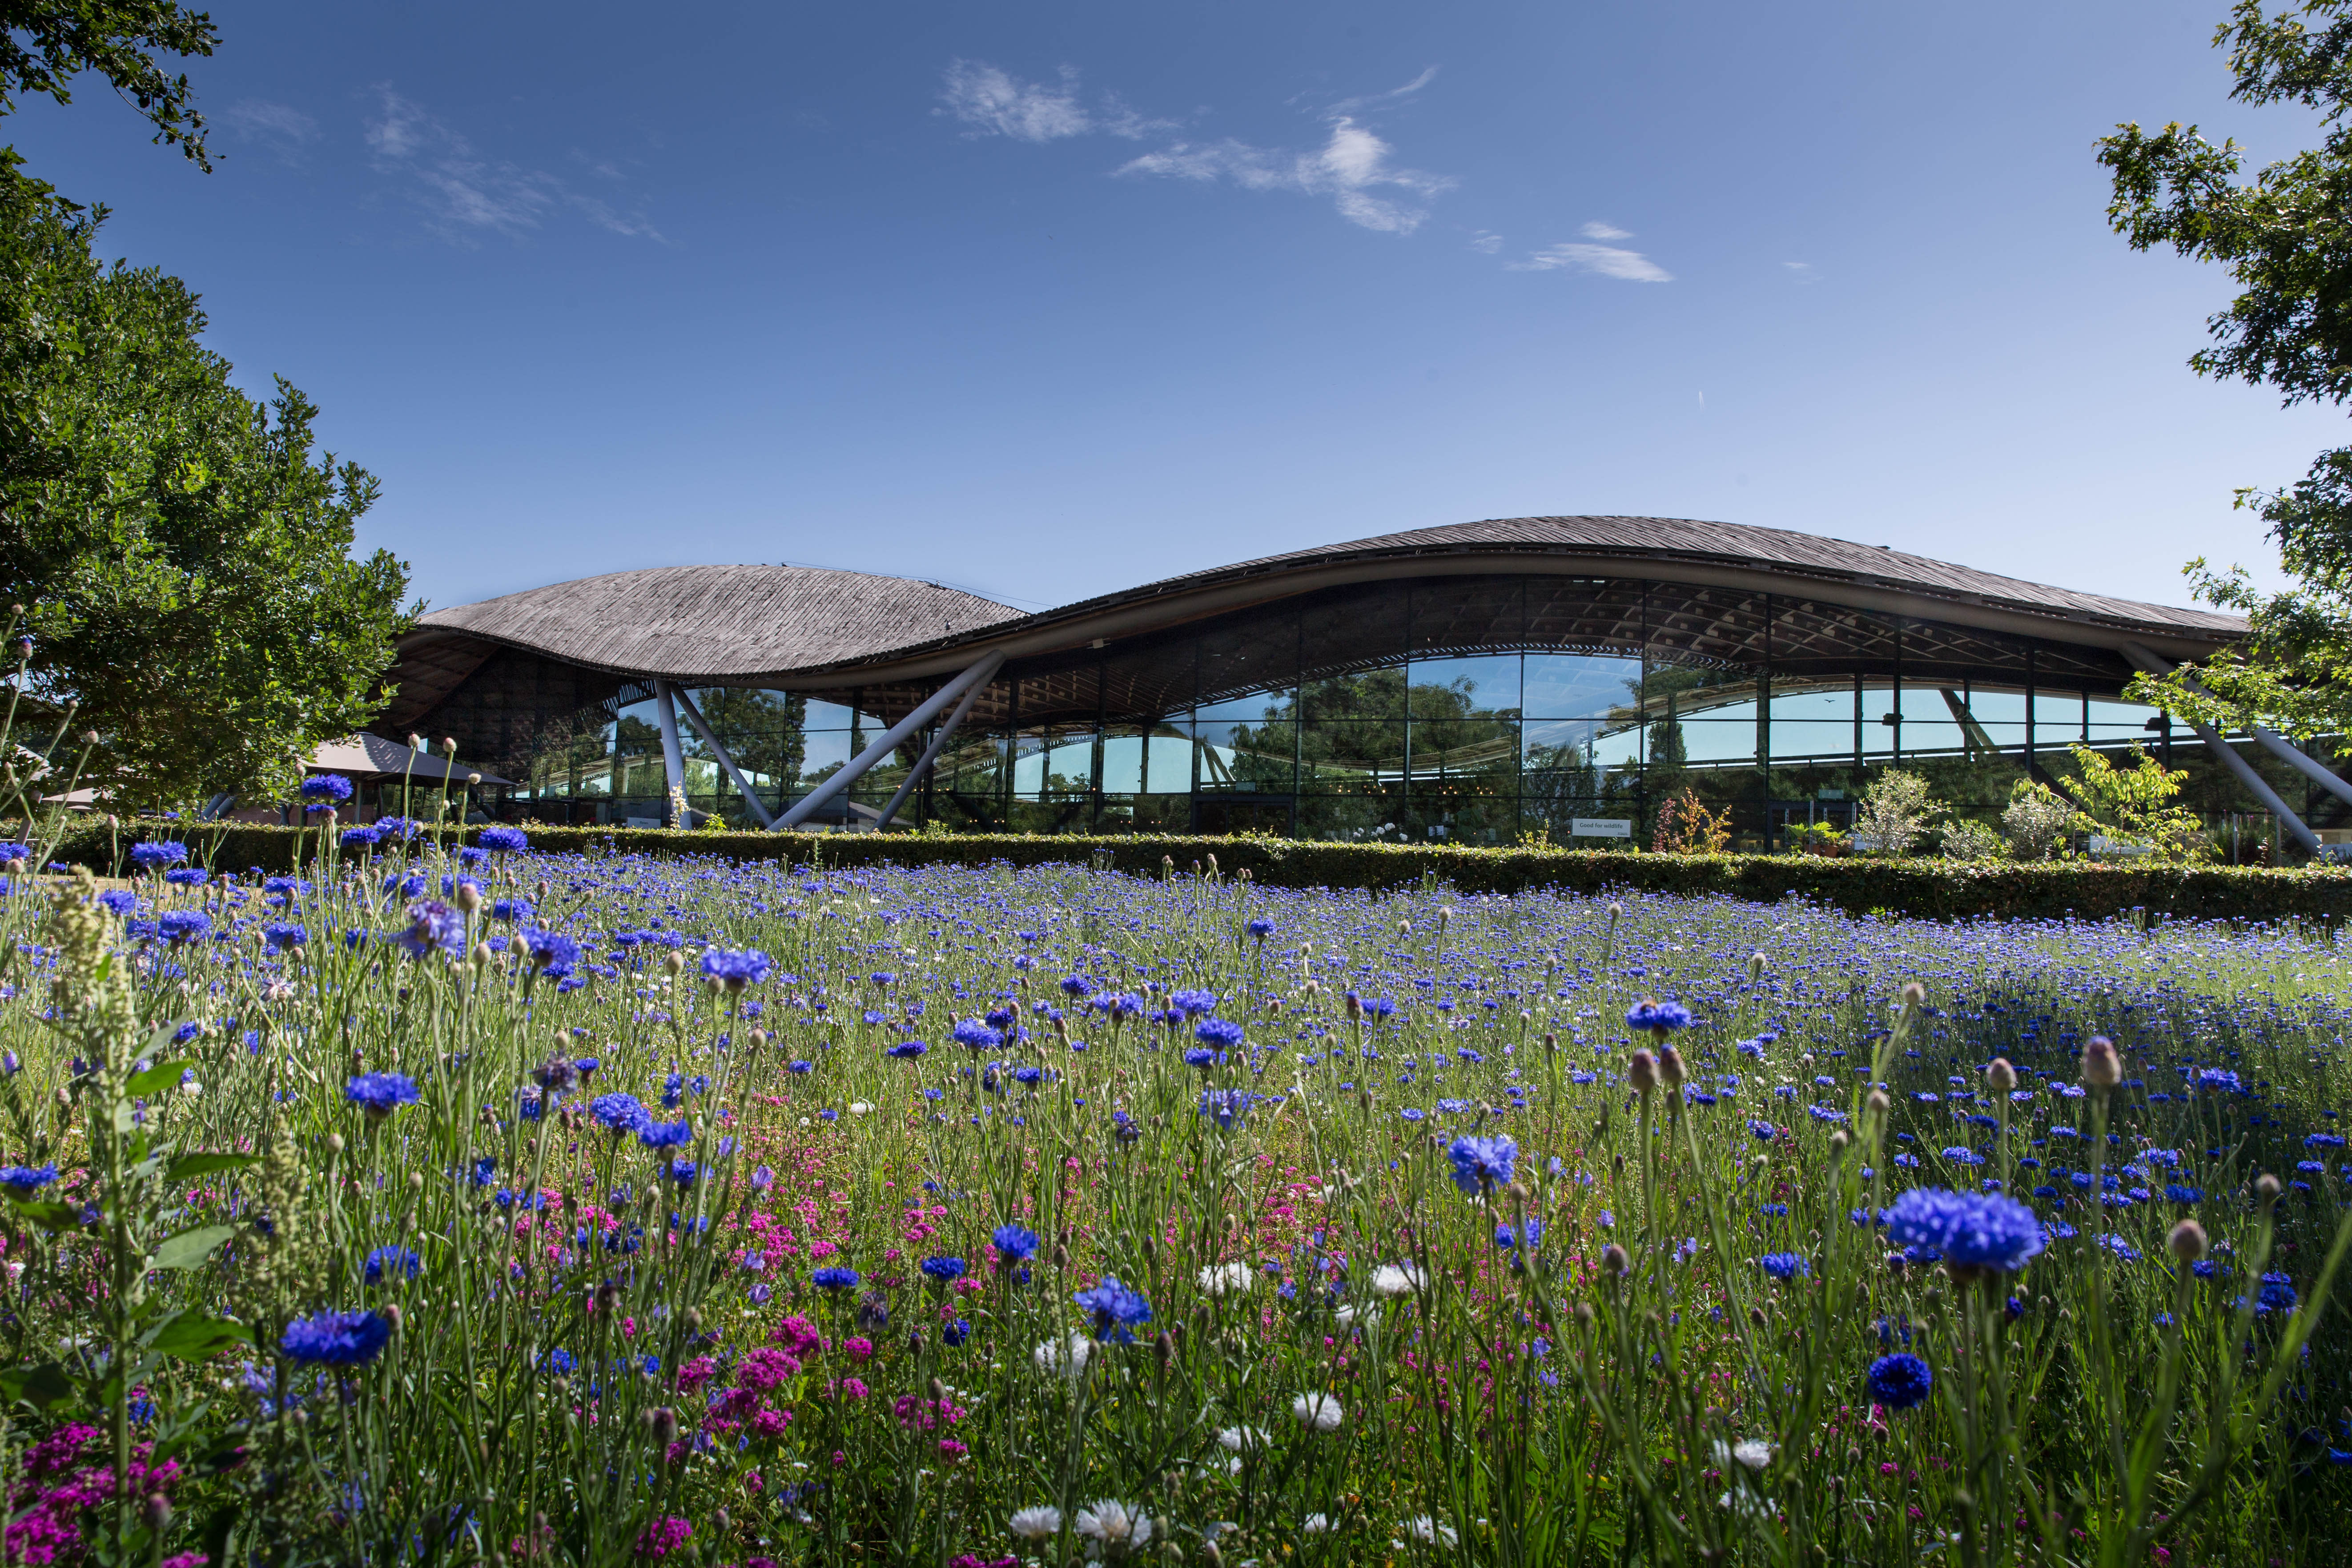 Savill Garden Building with wild flowers in the foreground